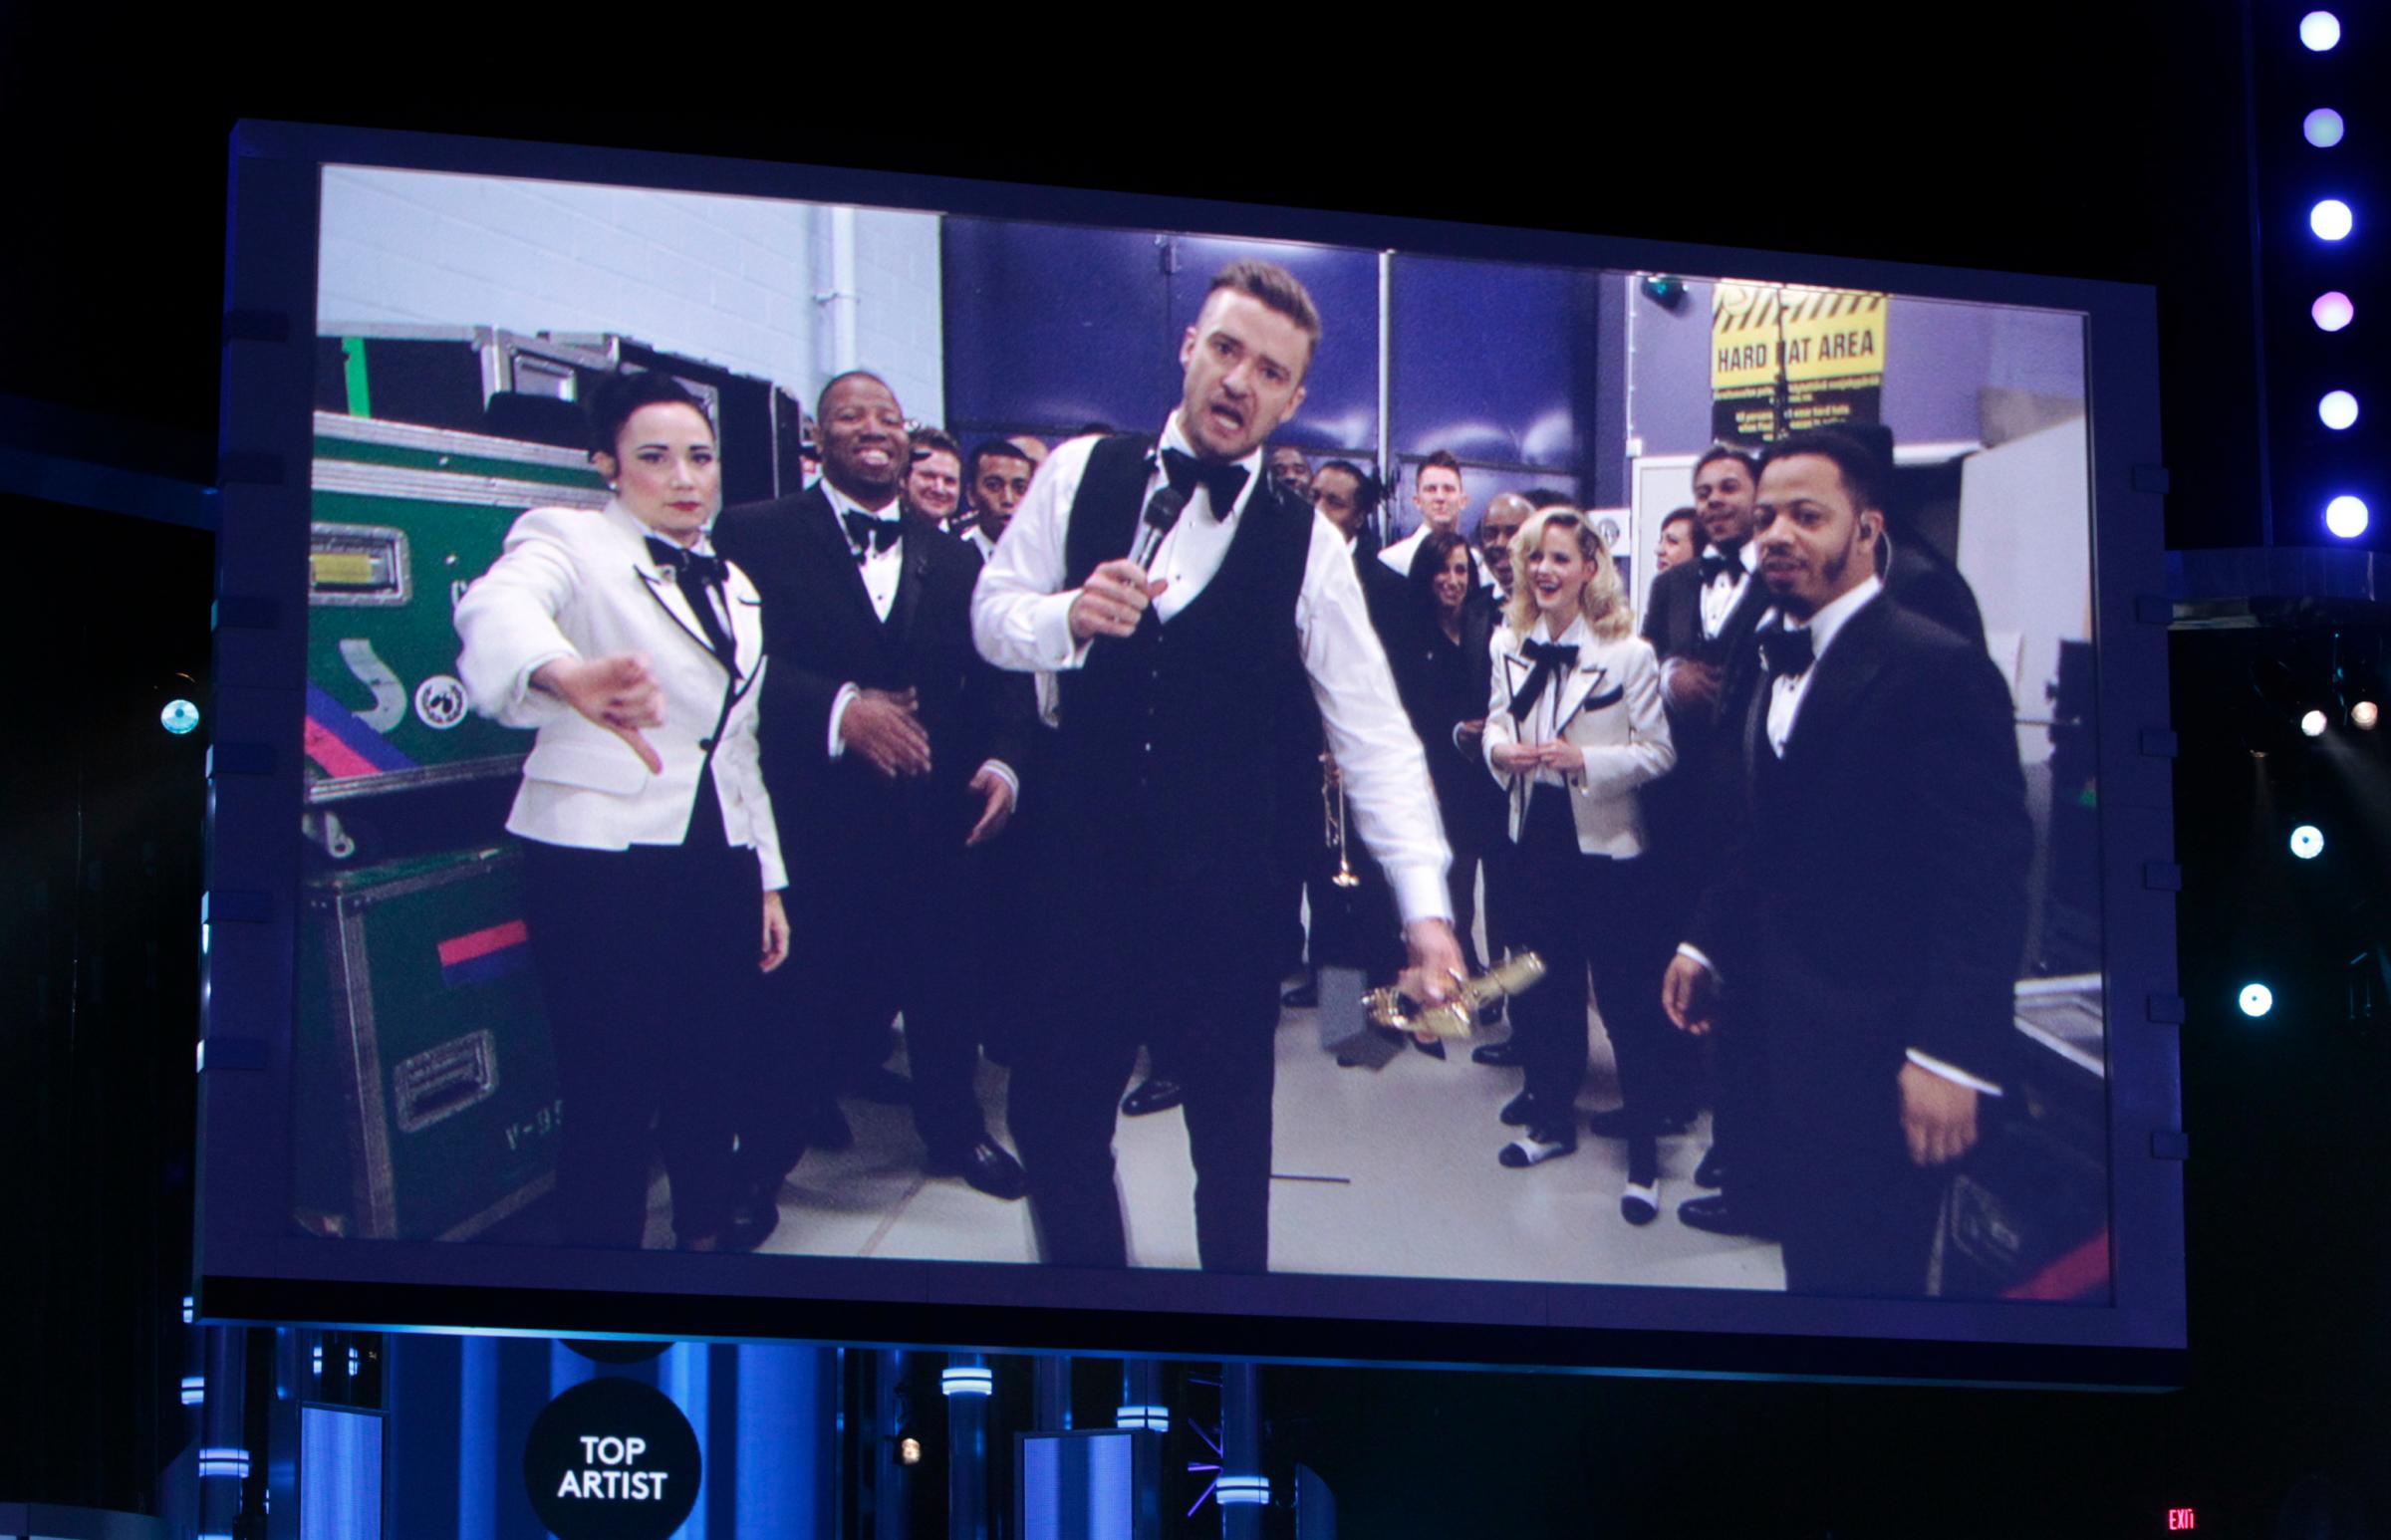 Justin Timberlake is shown on a large screen as he accepts the award for Top Artist at the 2014 Billboard Music Awards in Las Vegas